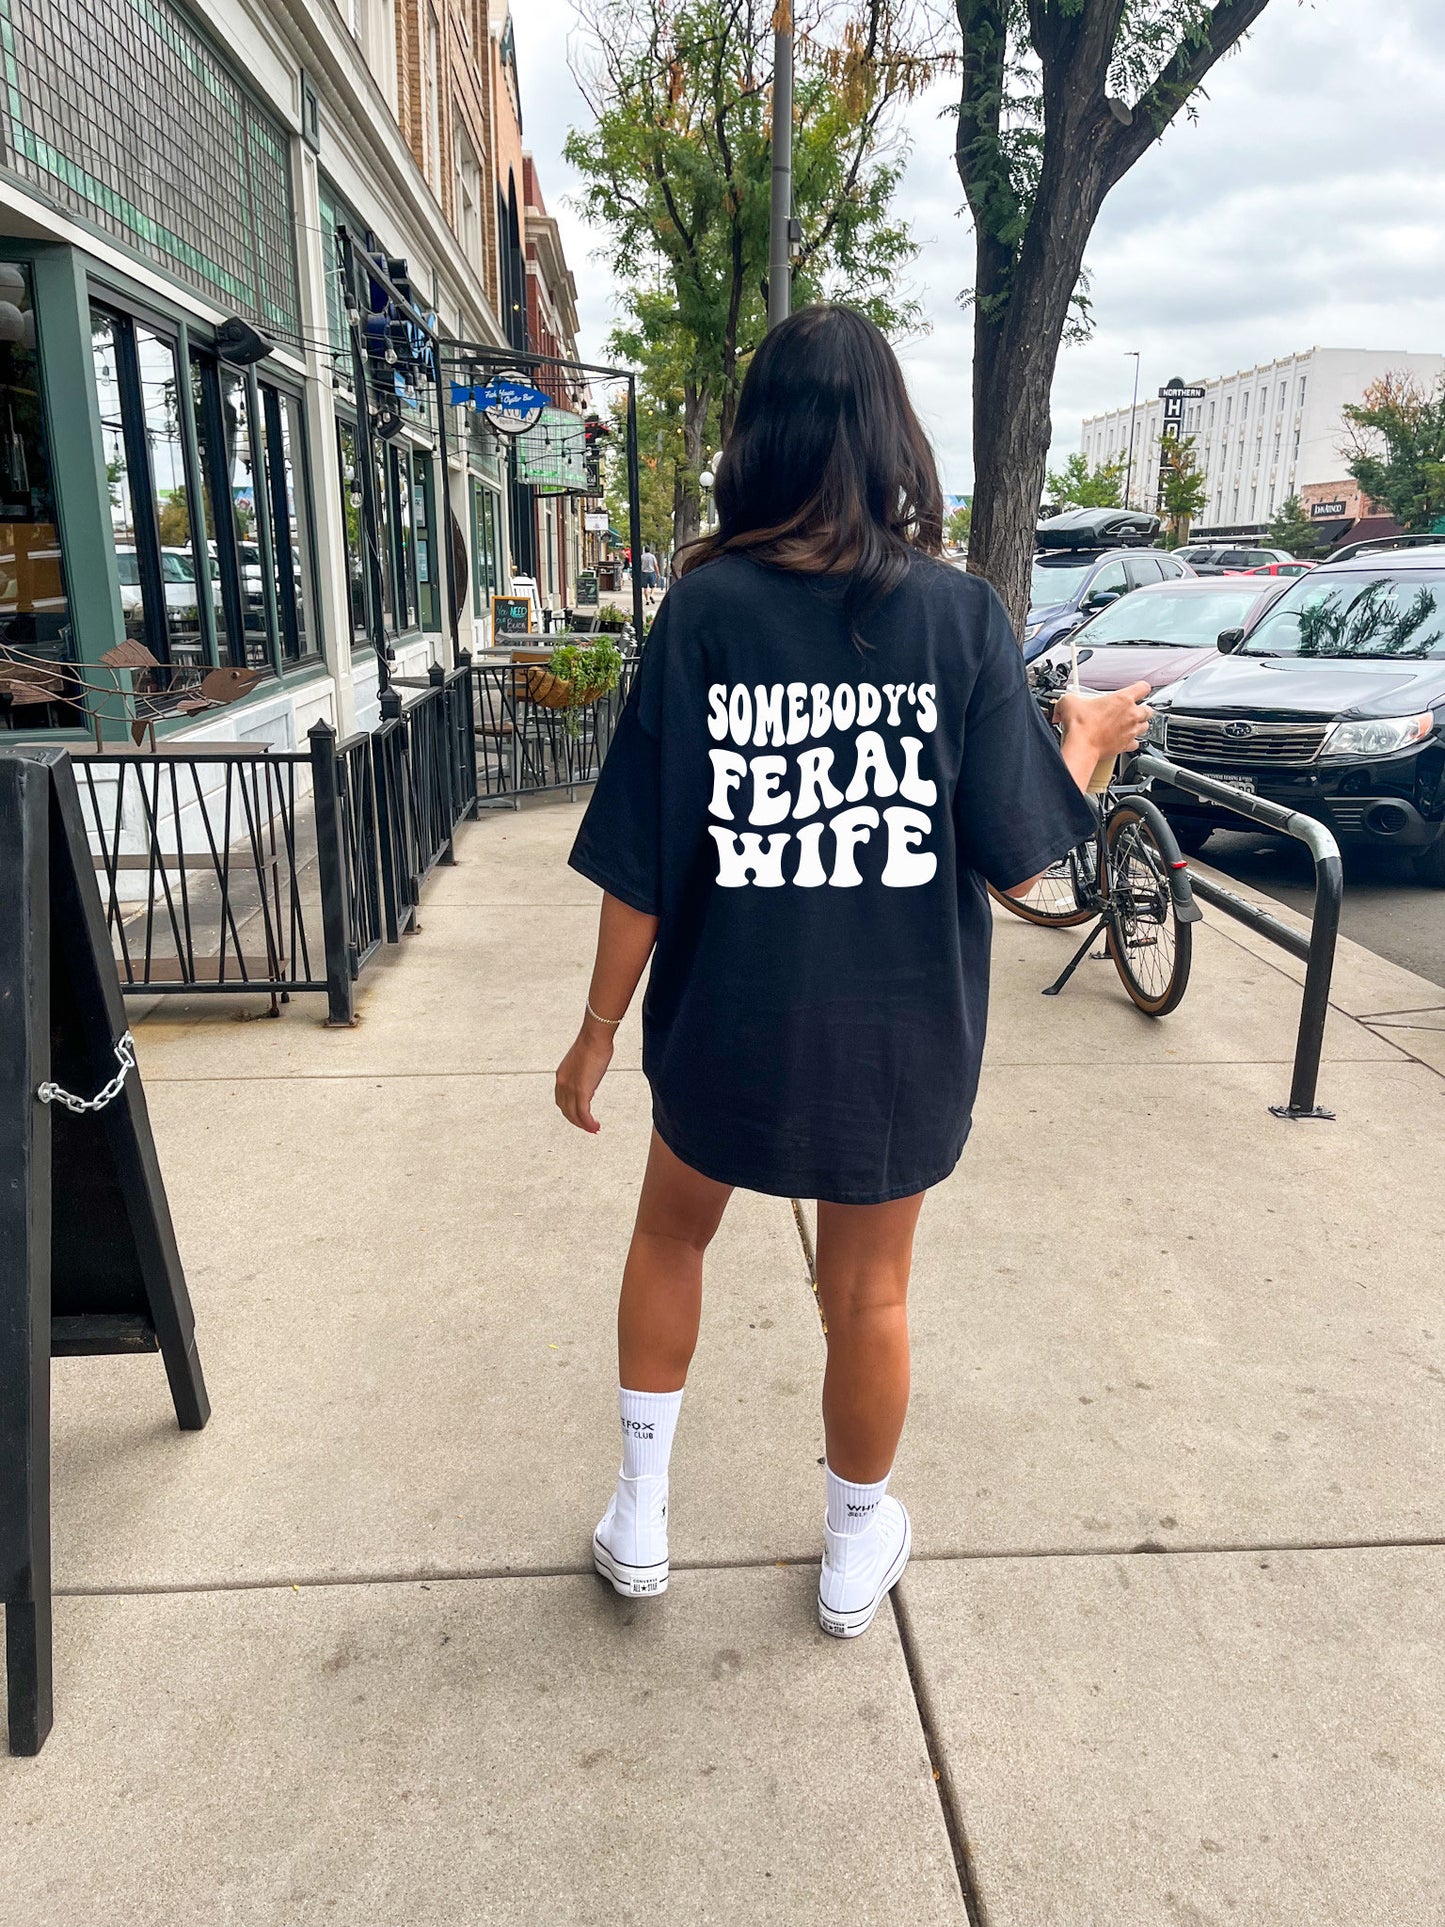 Somebodys feral ass wife tee, feral ass ex wife, feral ass mama, somebodys feral ex wife tee, feral wife,  feral mama